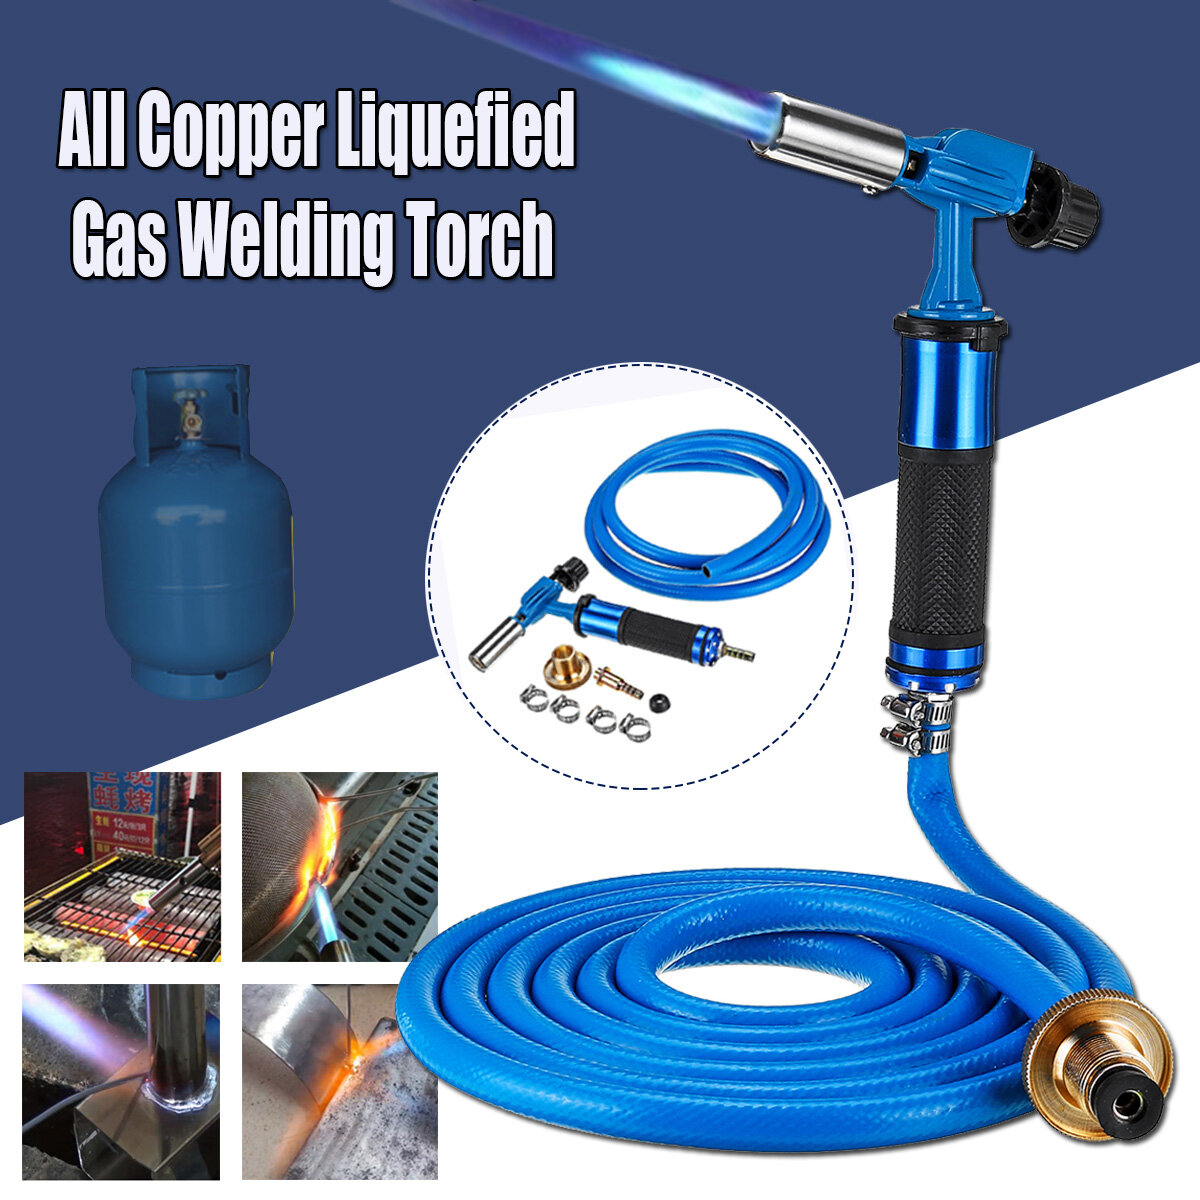 

Electronic Ignition Full Copperr Liquefied High Temperature Gas Welding Torch Kit + 3meters Tube